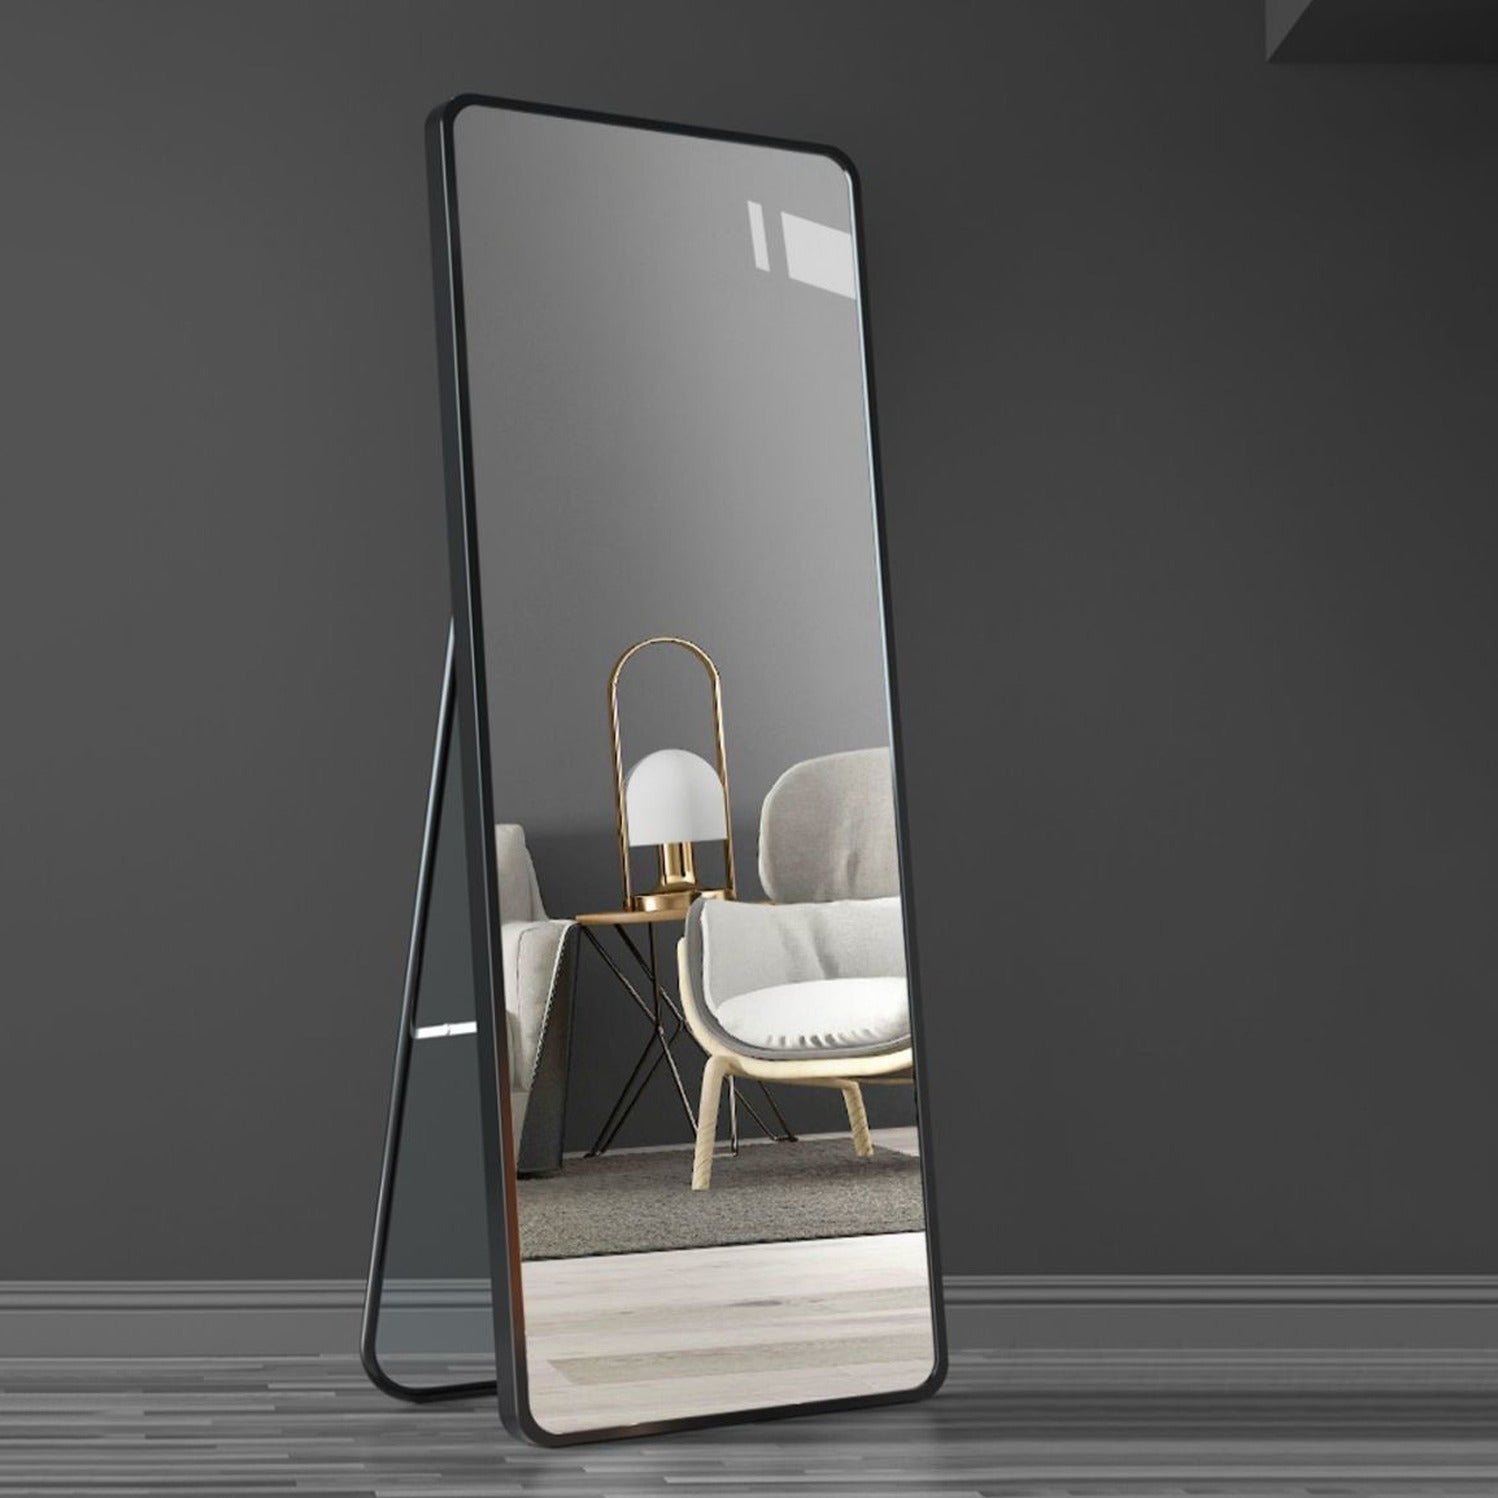 Large Full-Length Dressing Mirror for Bedroom on a stand